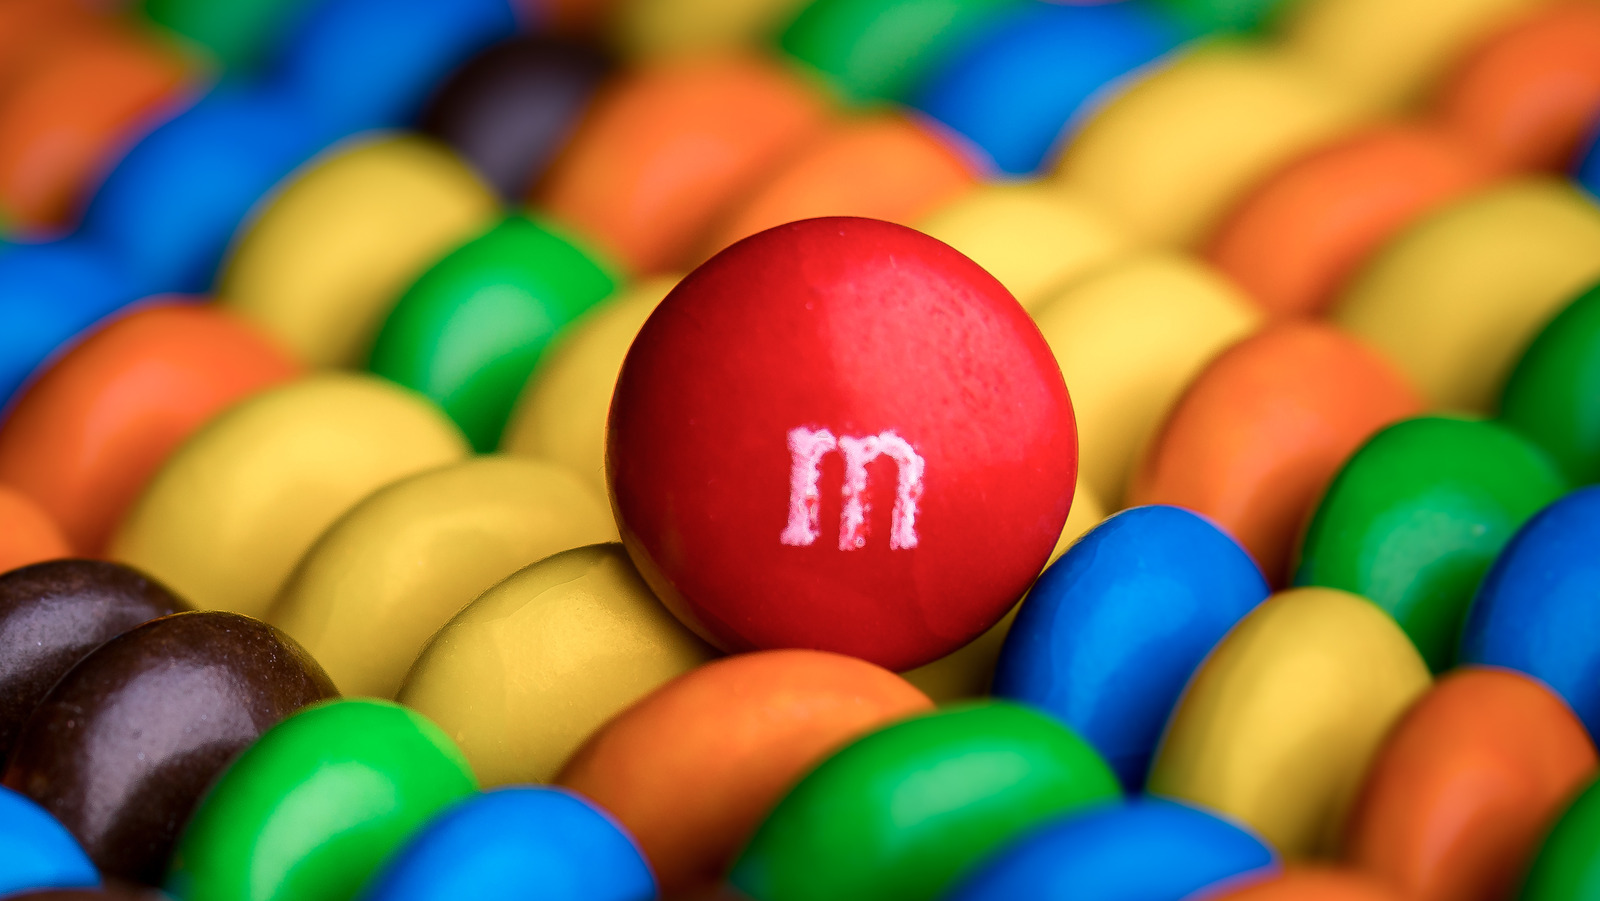 Do M&Ms Go Bad? Everything You Need To Know About Storing M&M's